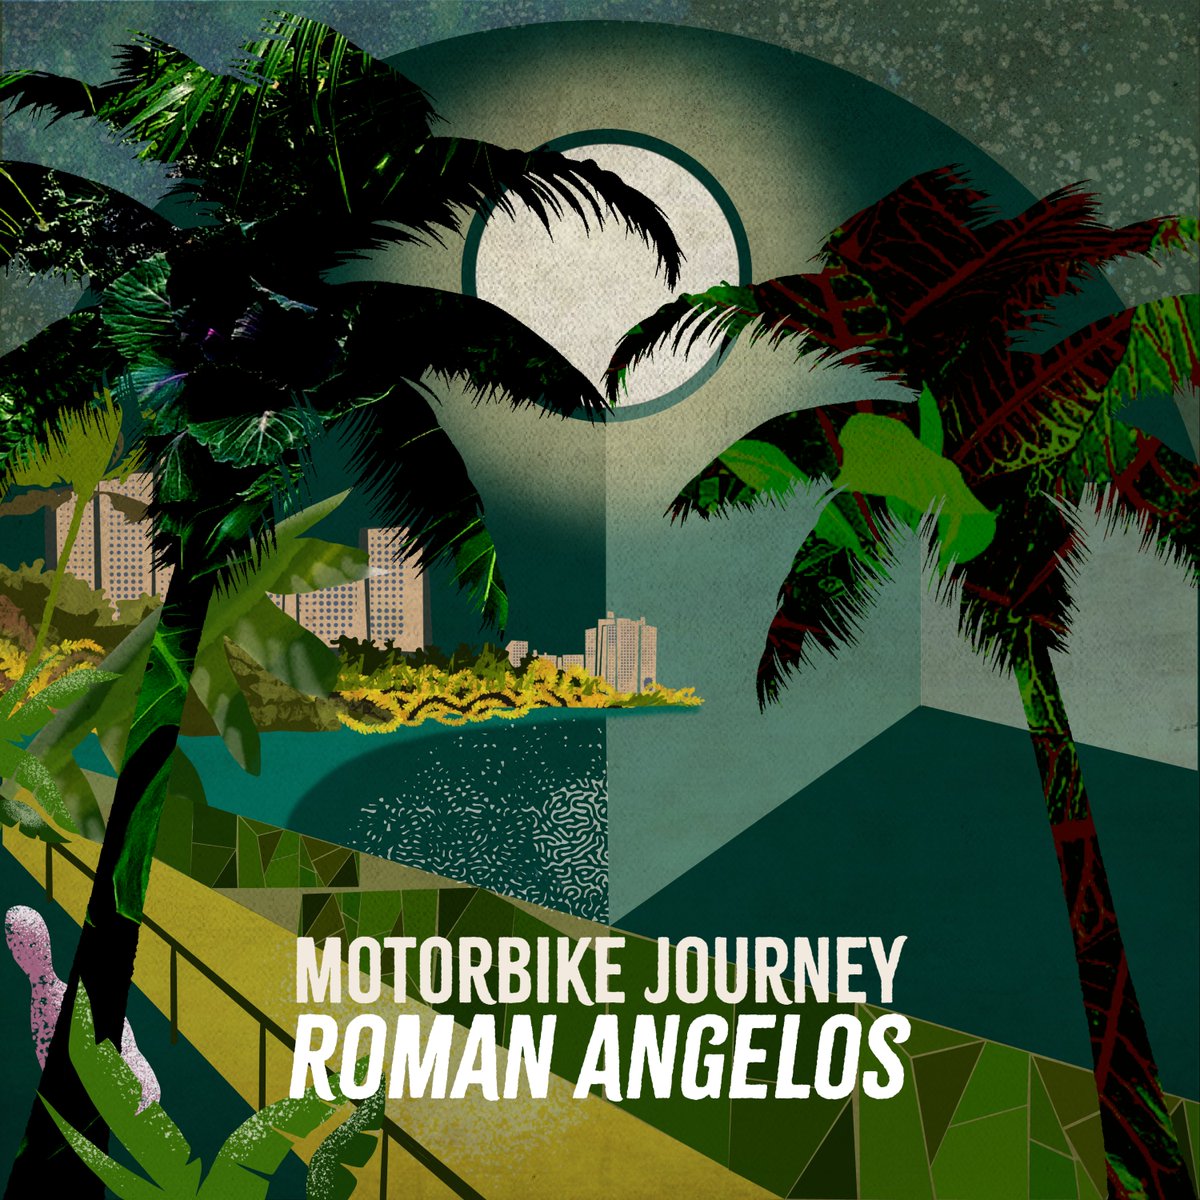 'Motorbike Journey' dropped this morning! First song from my next album 'Tropical Nites' Feat. lovely vibraphone from @brittanyanjou, sweet horns/woodwinds from @nadavnirenberg & Rose Rutledge.open.spotify.com/album/6aTju7D2…